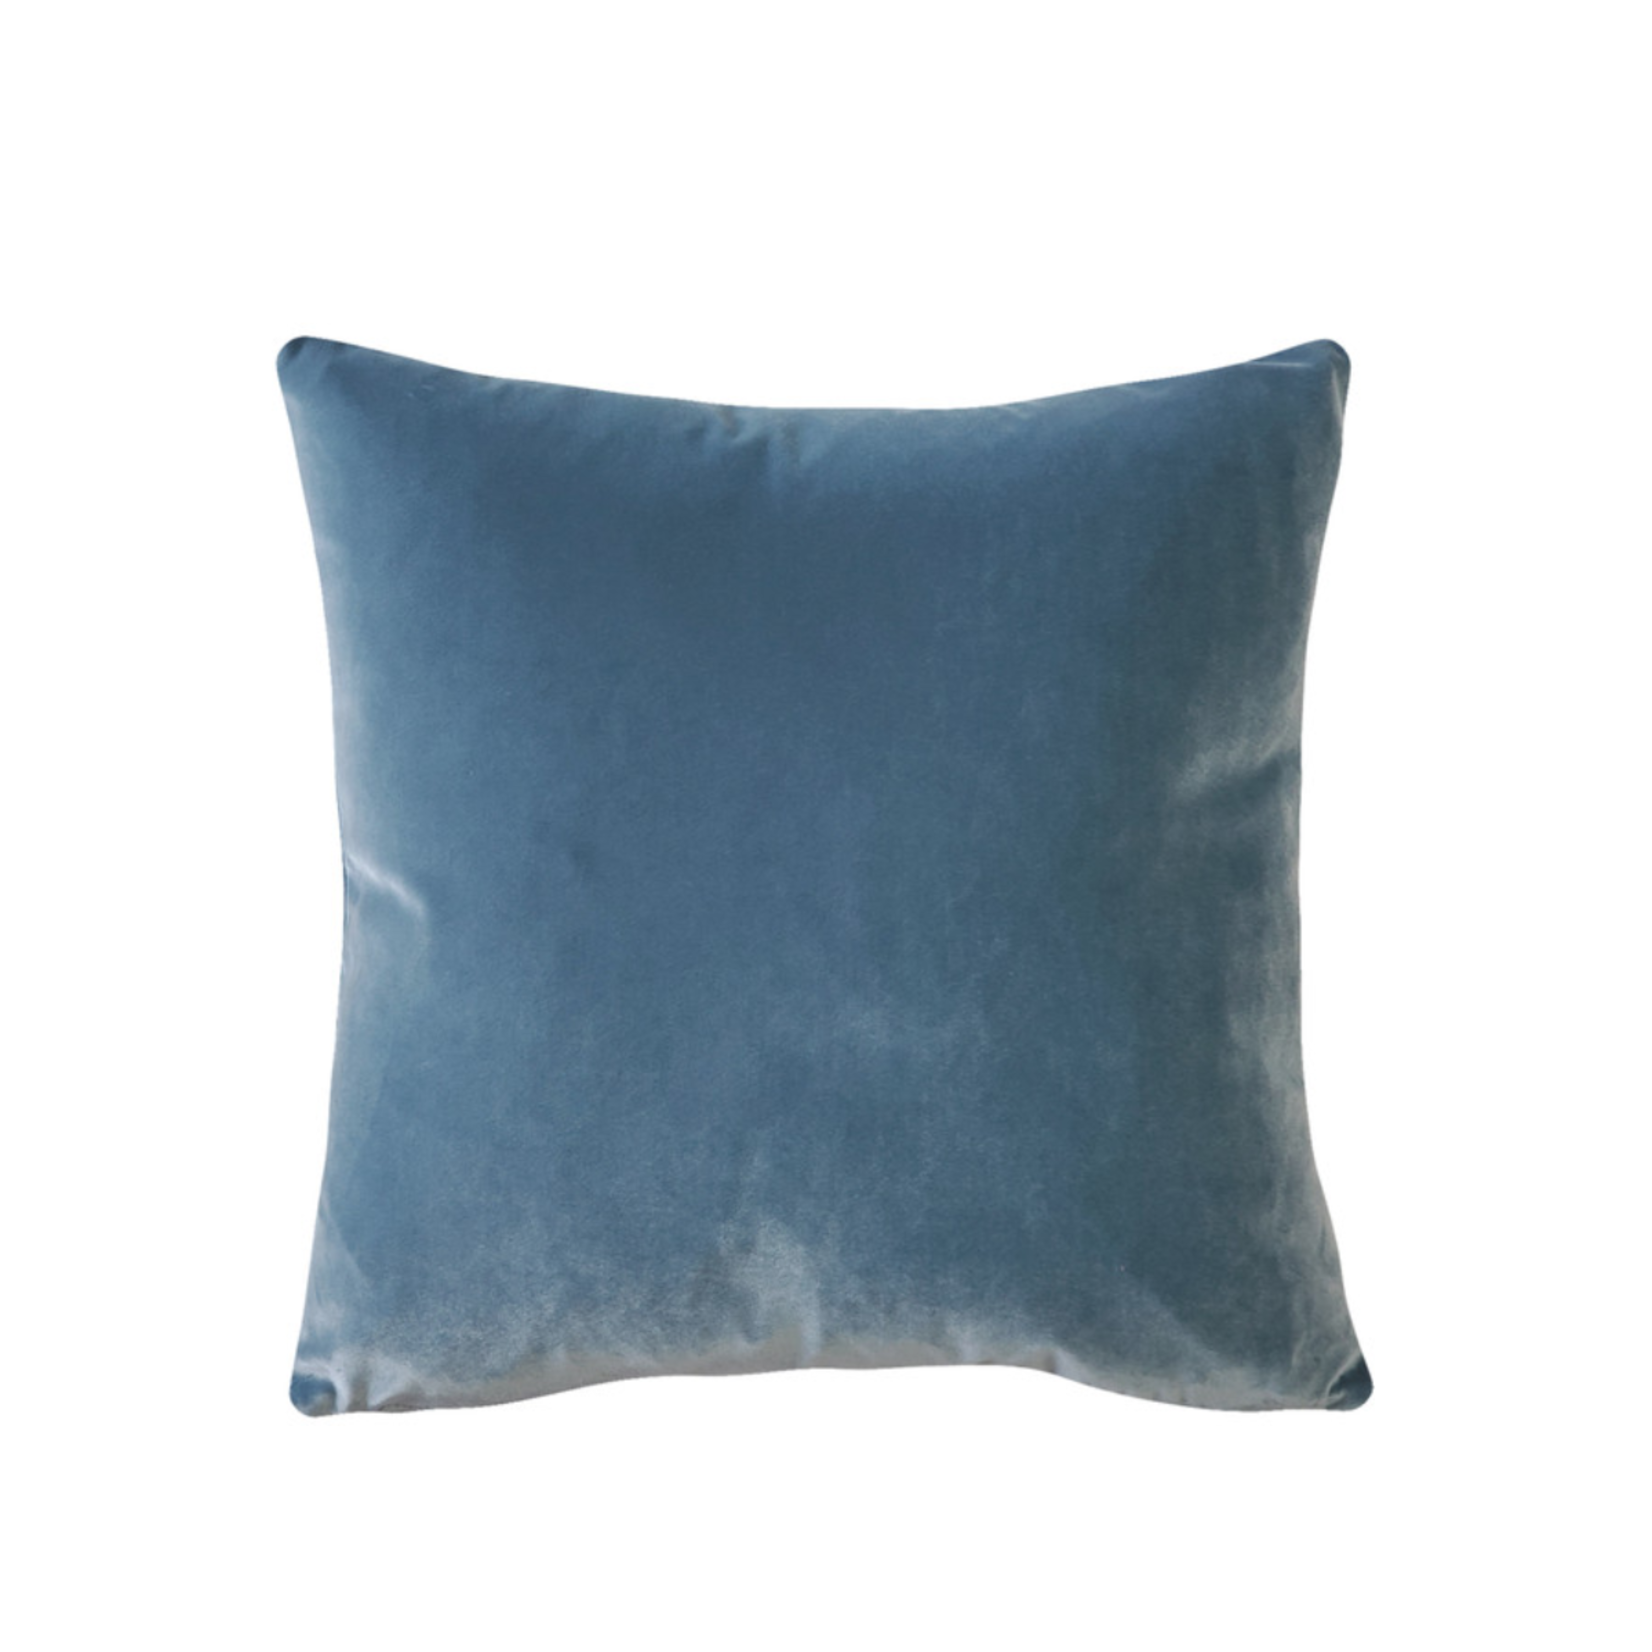 Castello Provincial Blue Velvet Throw Cushion with Feather filler